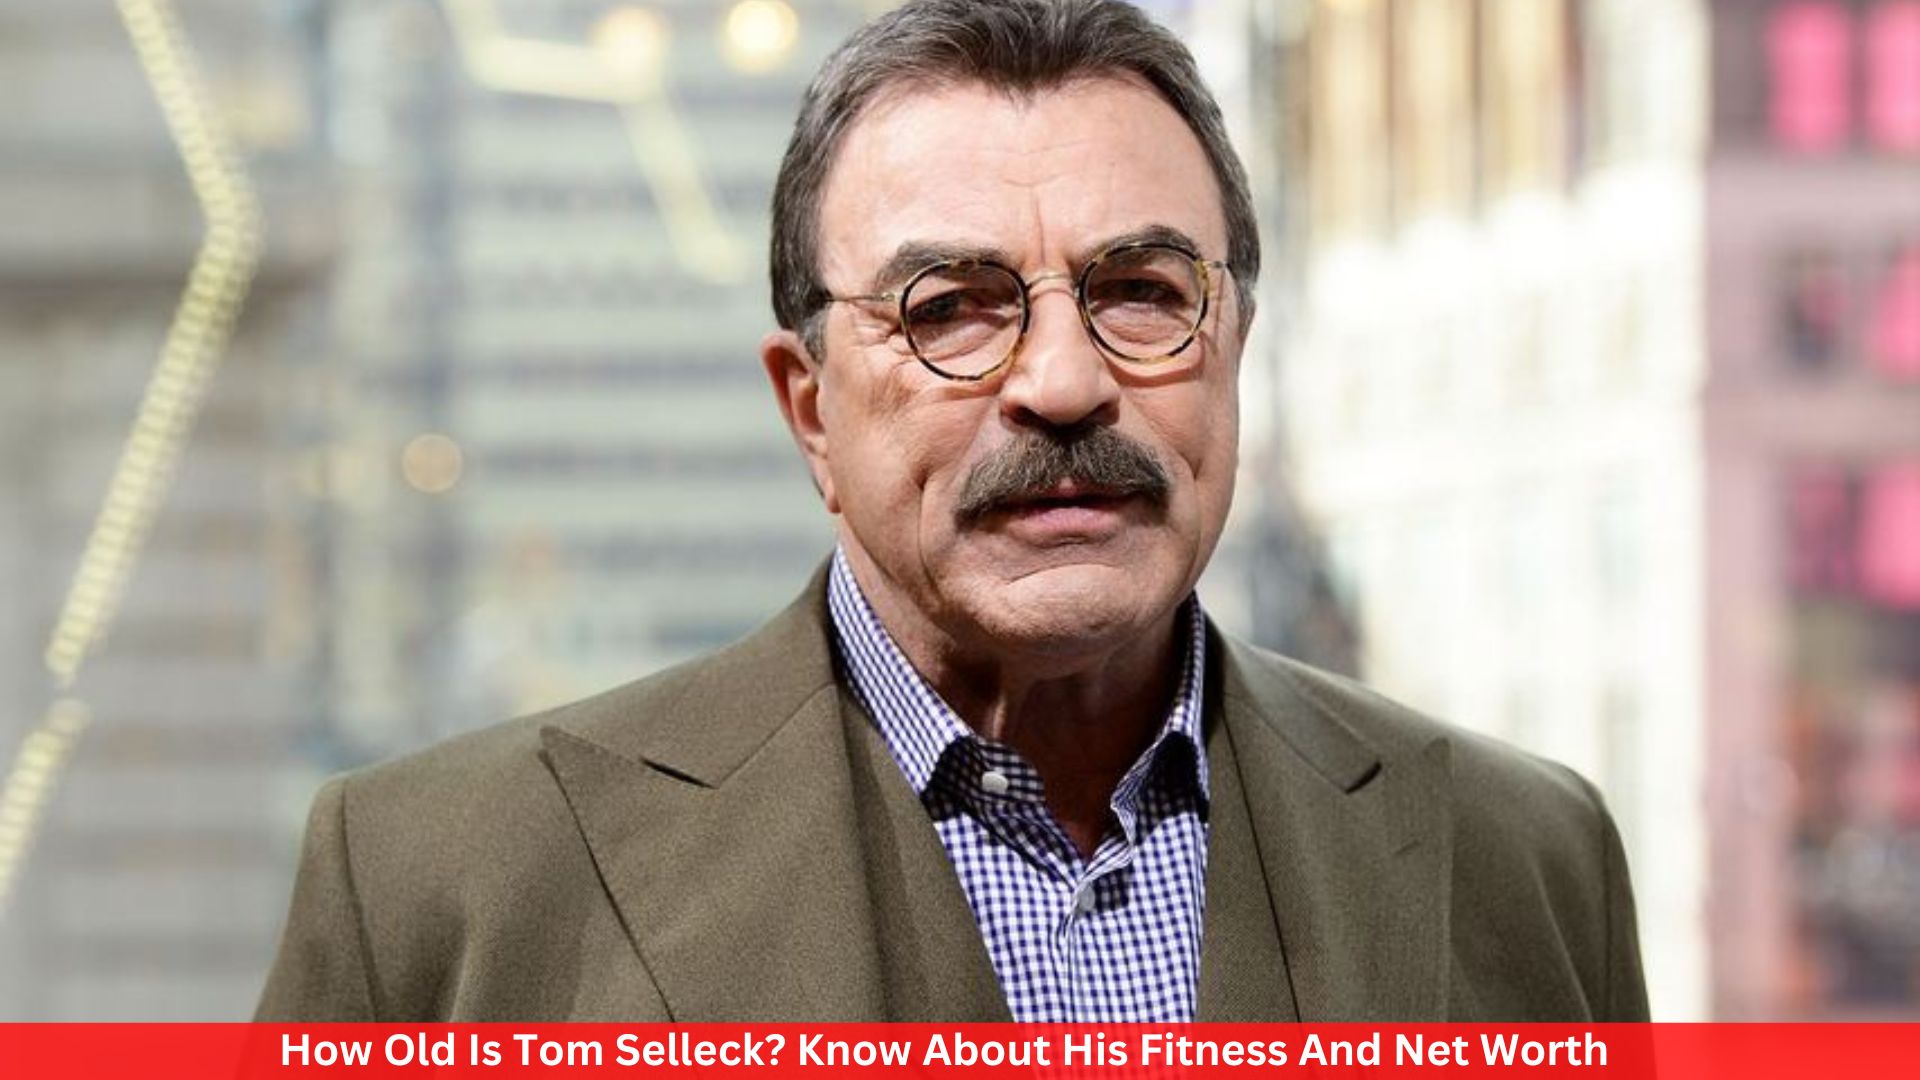 How Old Is Tom Selleck? Know About His Fitness And Net Worth